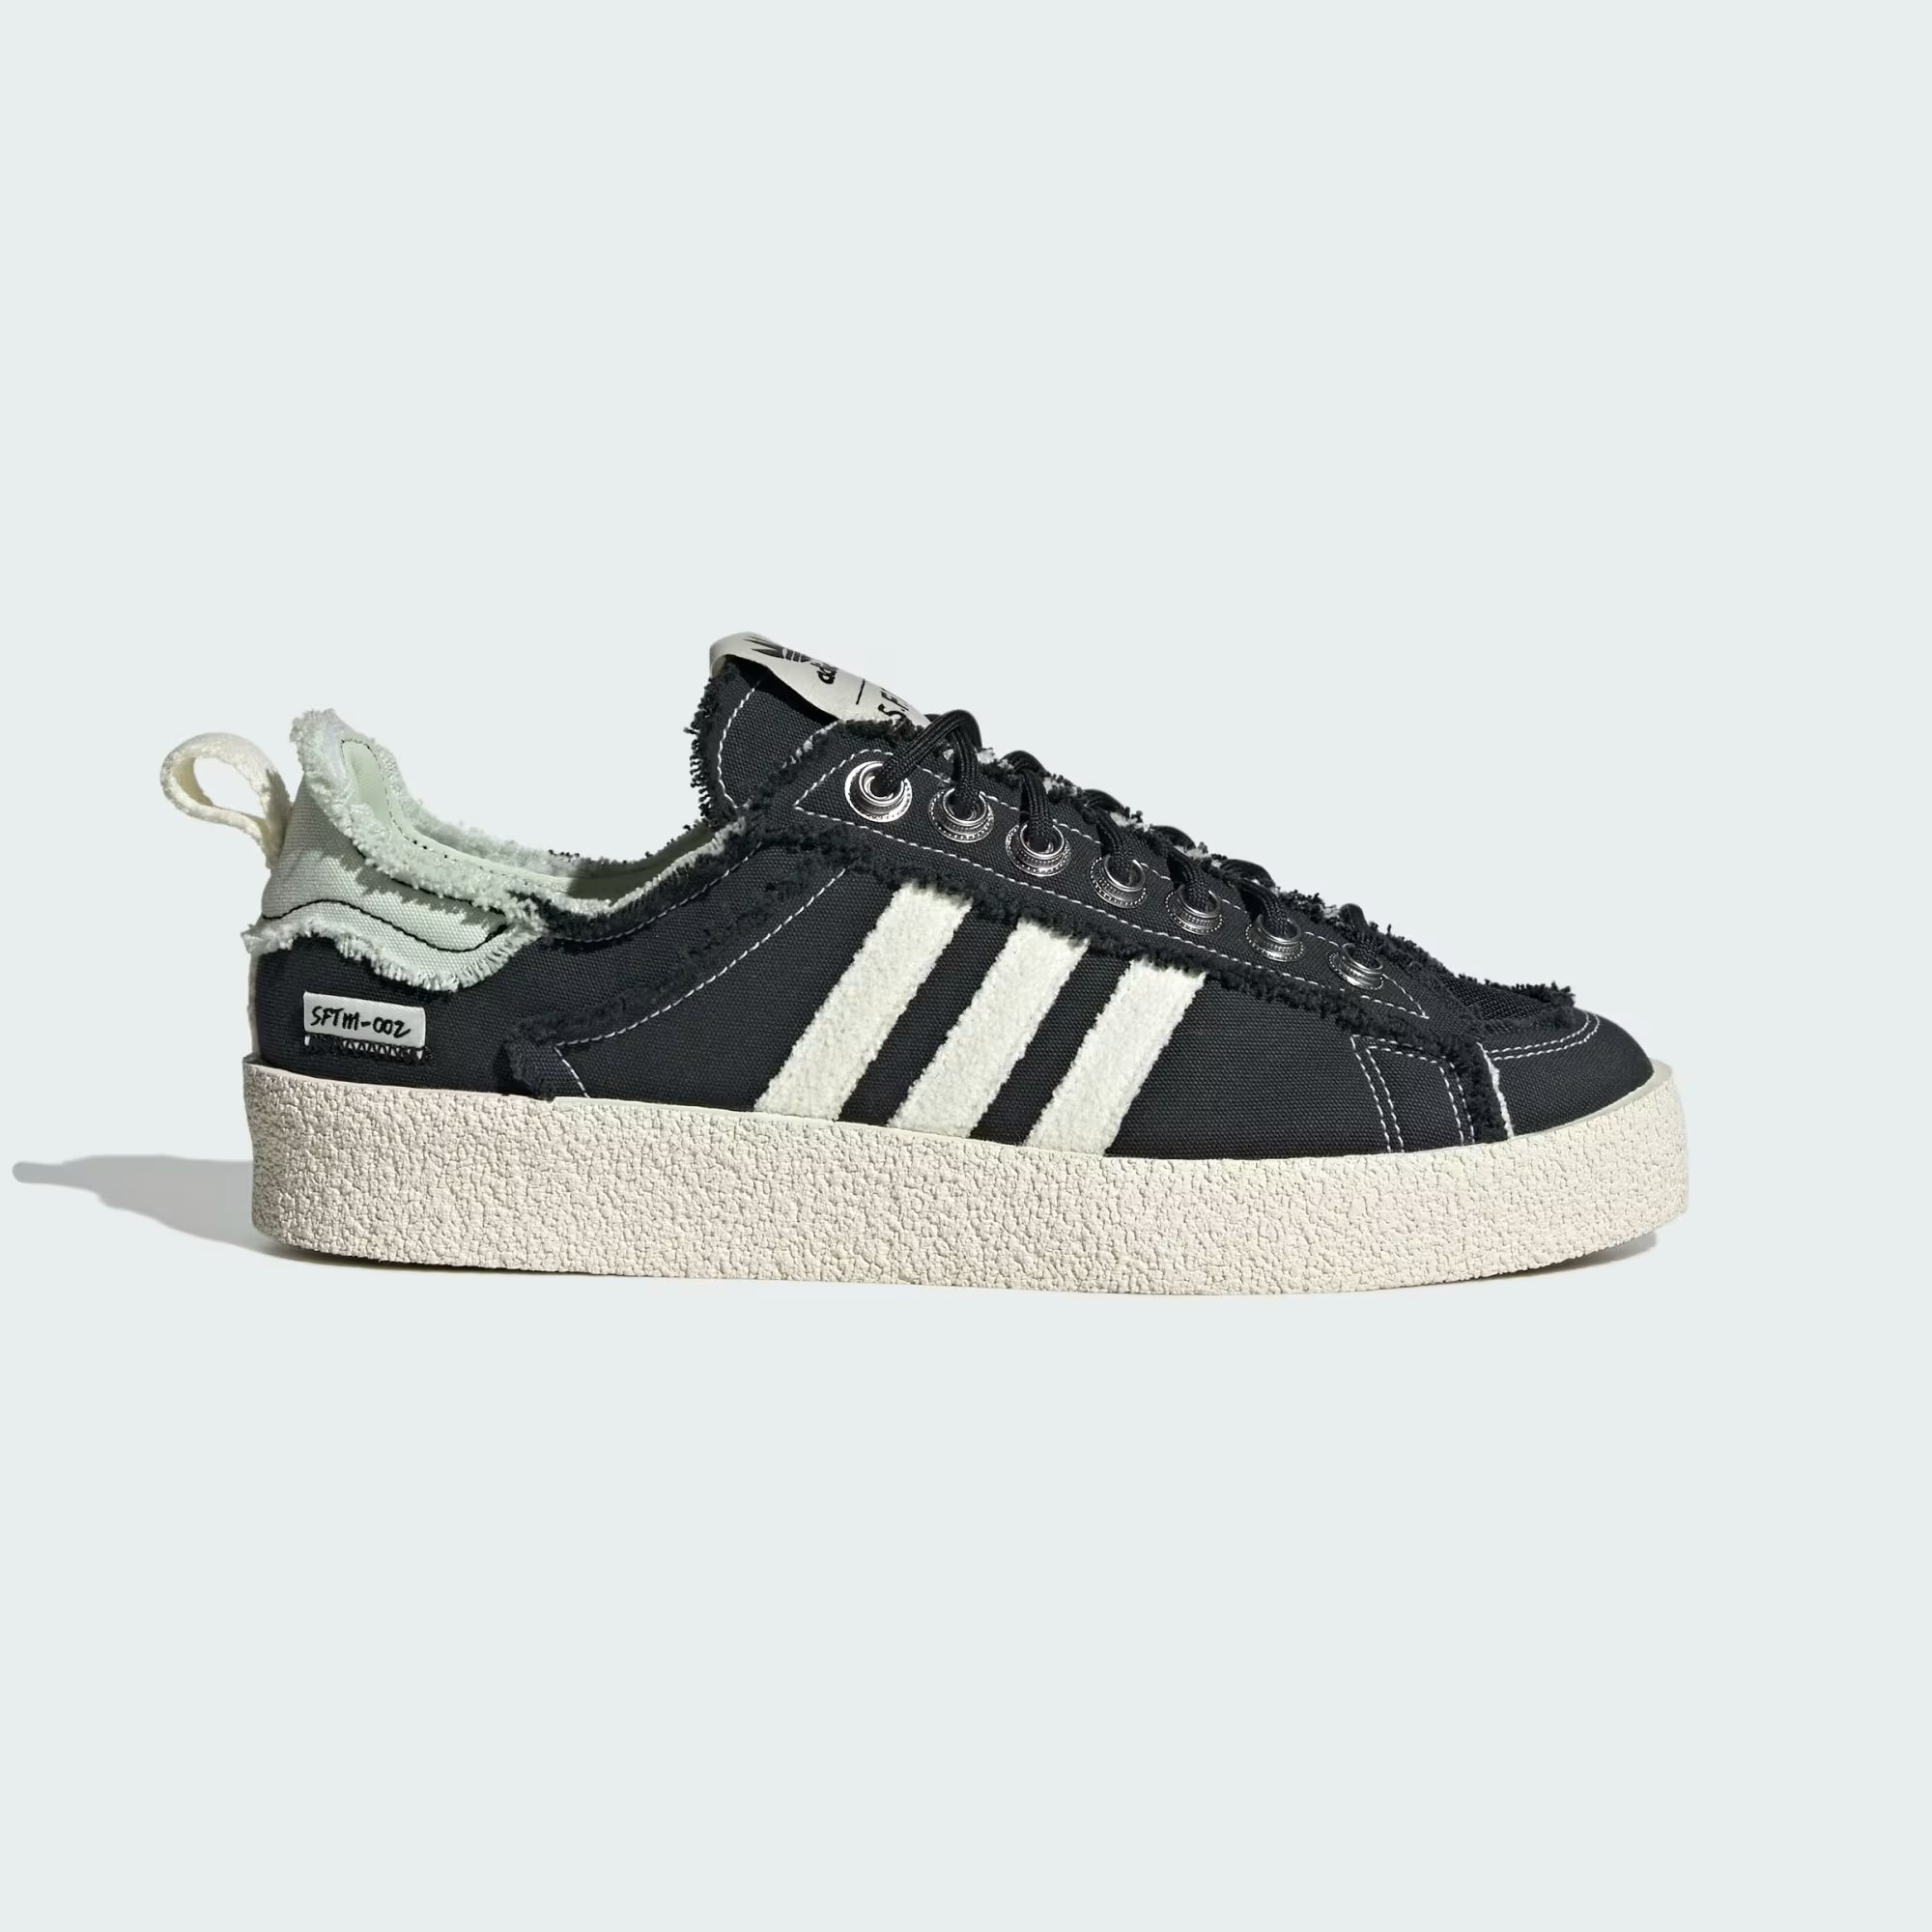 Song for the Mute x adidas Campus 80s "Core Black"